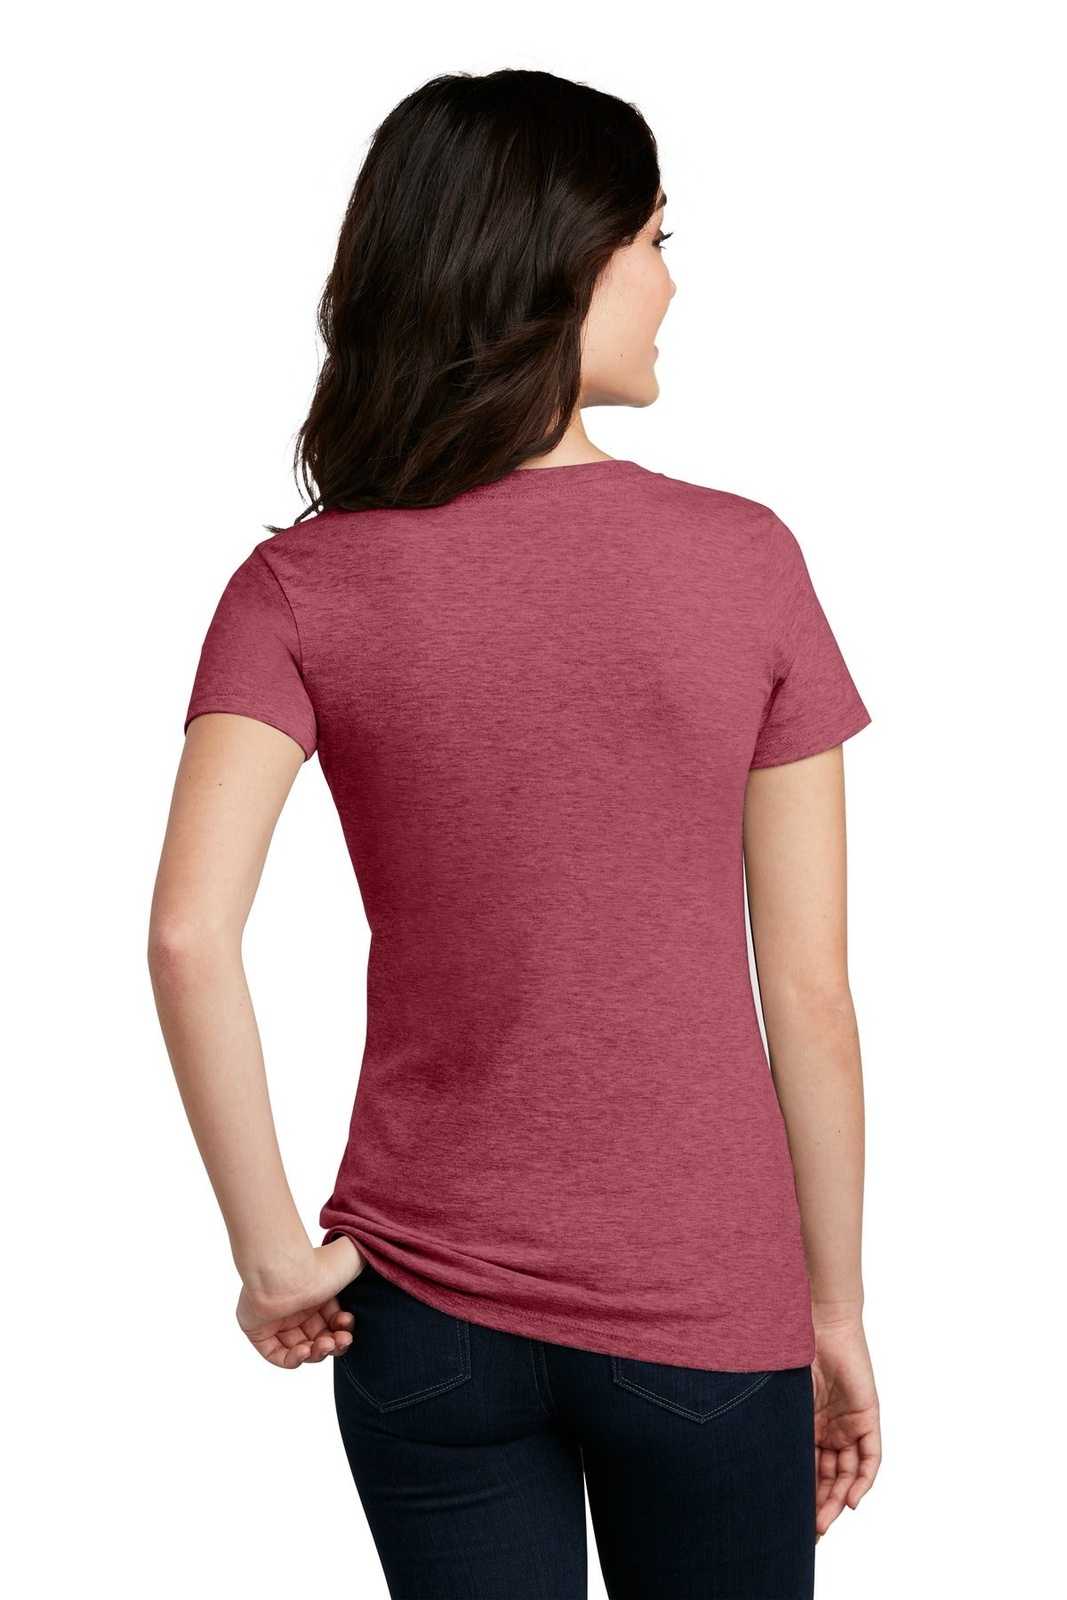 District DM1190L Women's Perfect Blend V-Neck Tee - Heathered Red - HIT a Double - 1